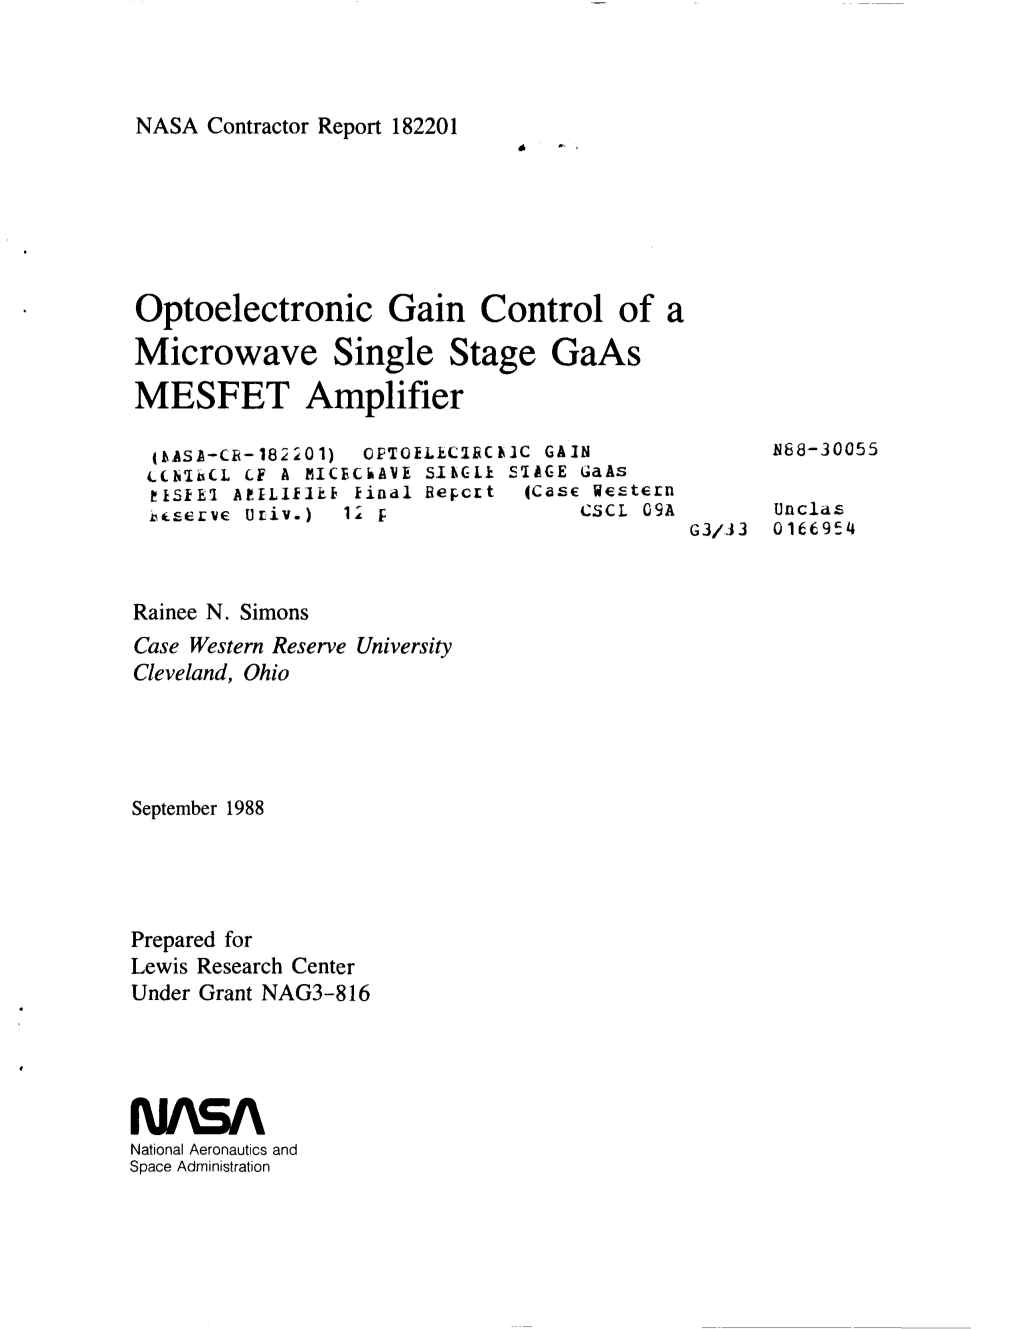 Optoelectronic Gain Control of a Microwave Single Stage Gaas MESFET Amplifier